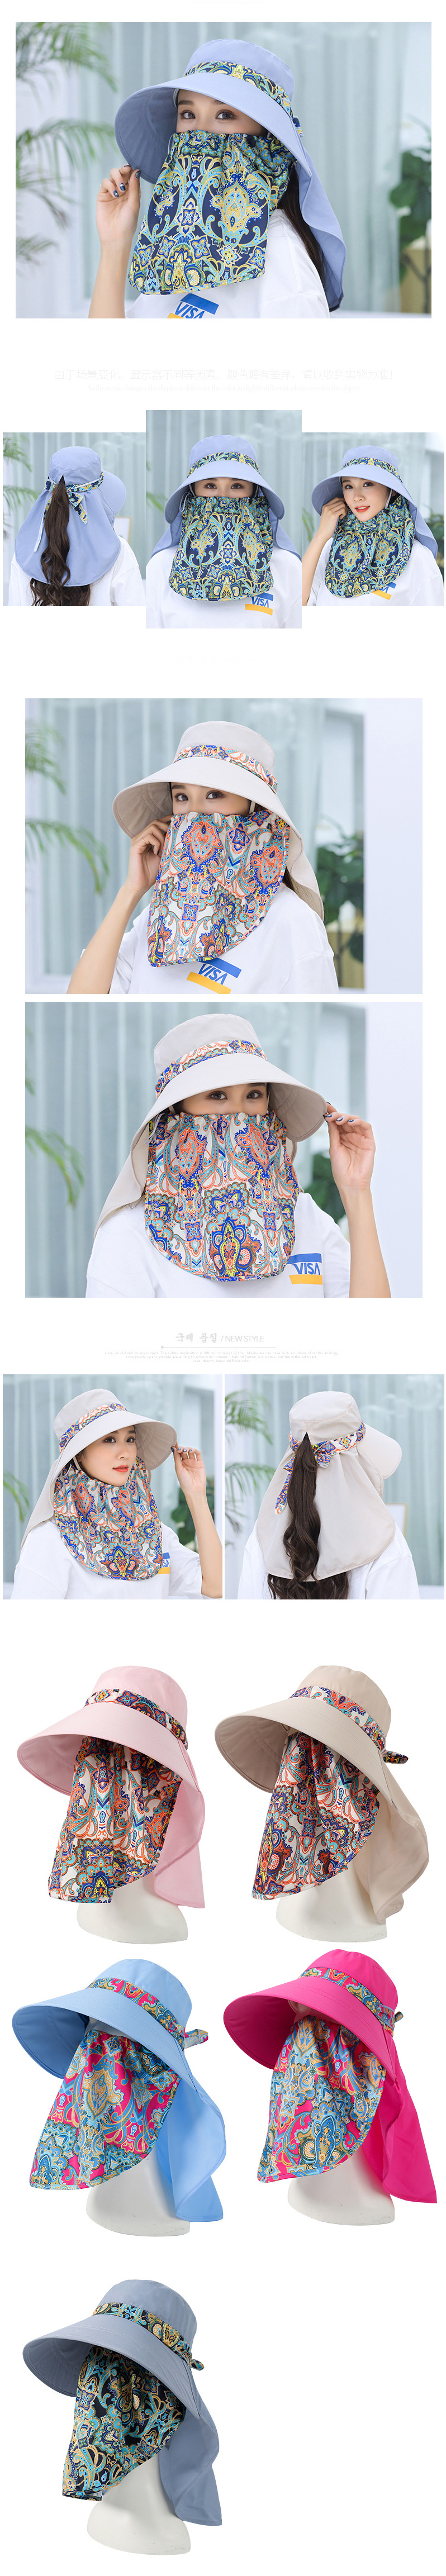 Female-Adjustable-Full-Face-Dustproof-Protective-Sun-Hat-with-Mask-Summer-Outdoor-UV-Proof-Sunscreen-1668642-3